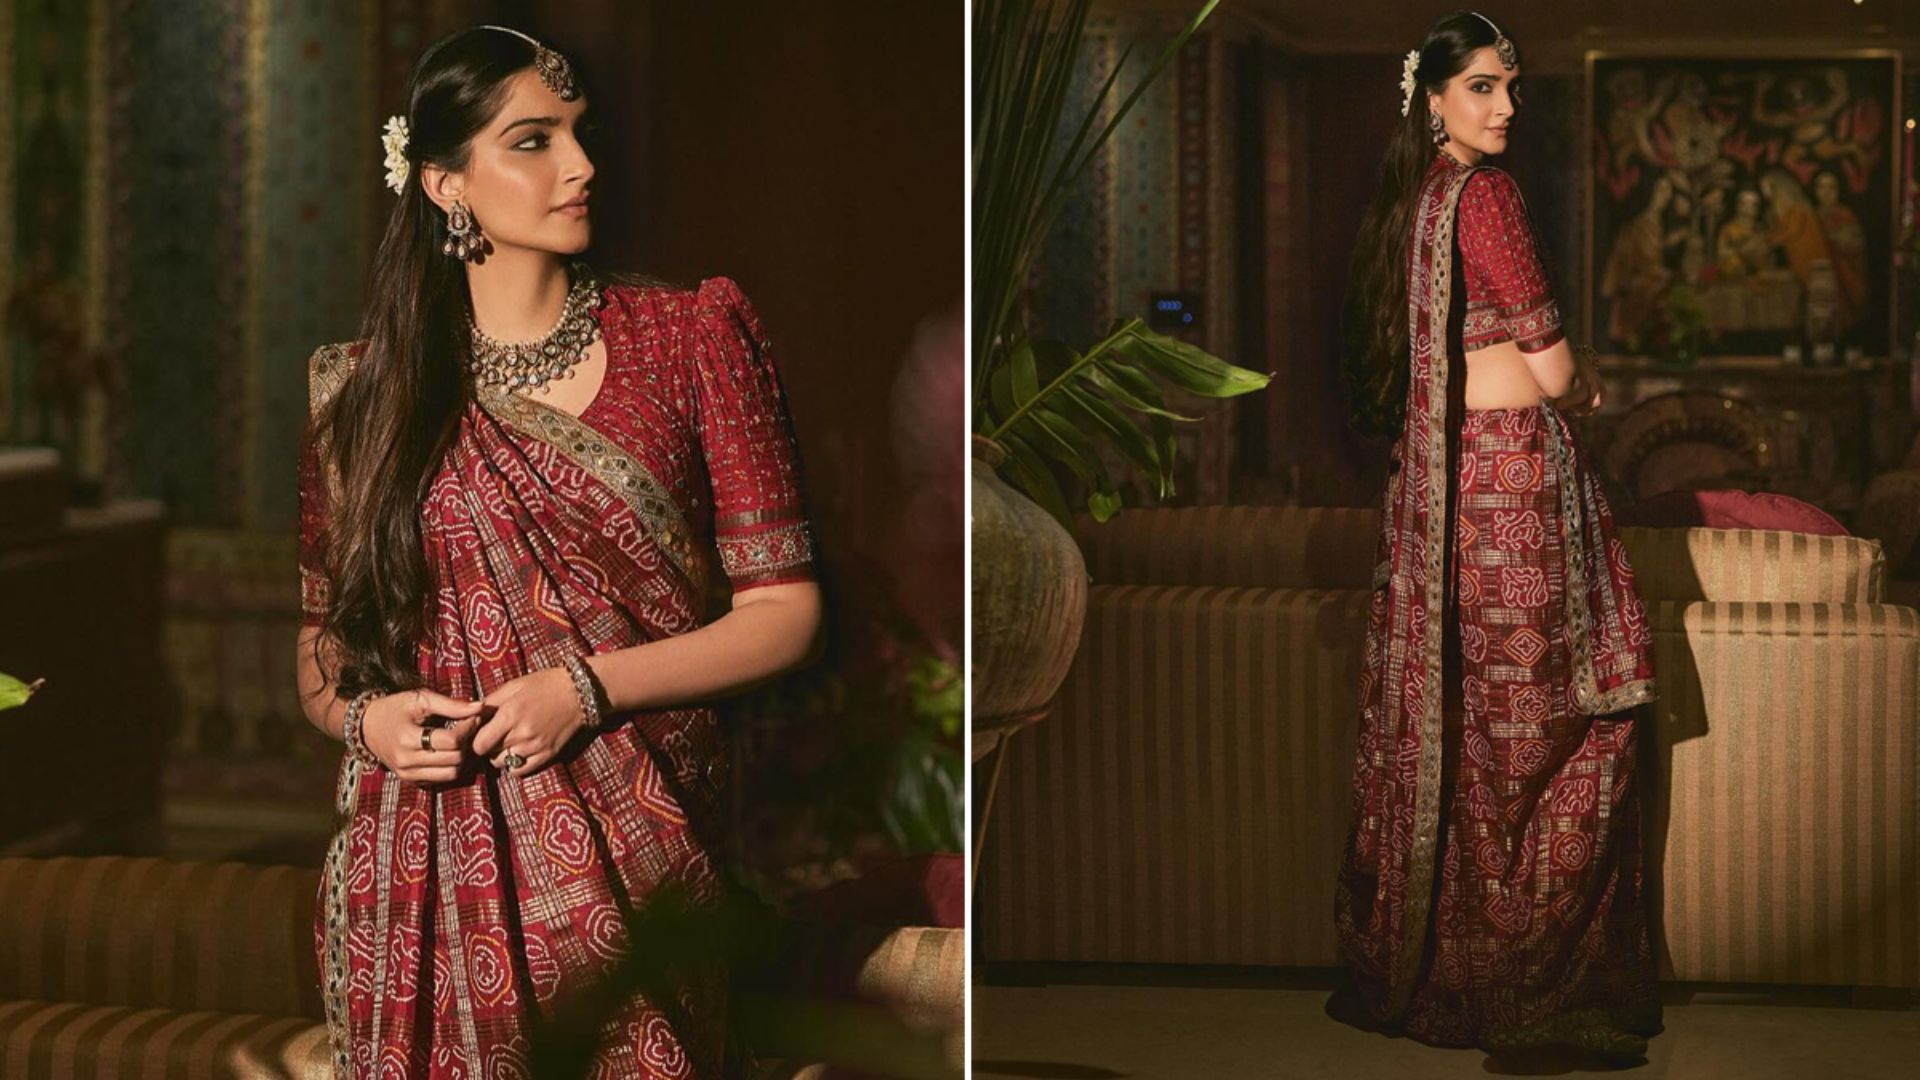 Sonam Kapoor dons her mother’s 35-year-old sari to revive the traditional vibe